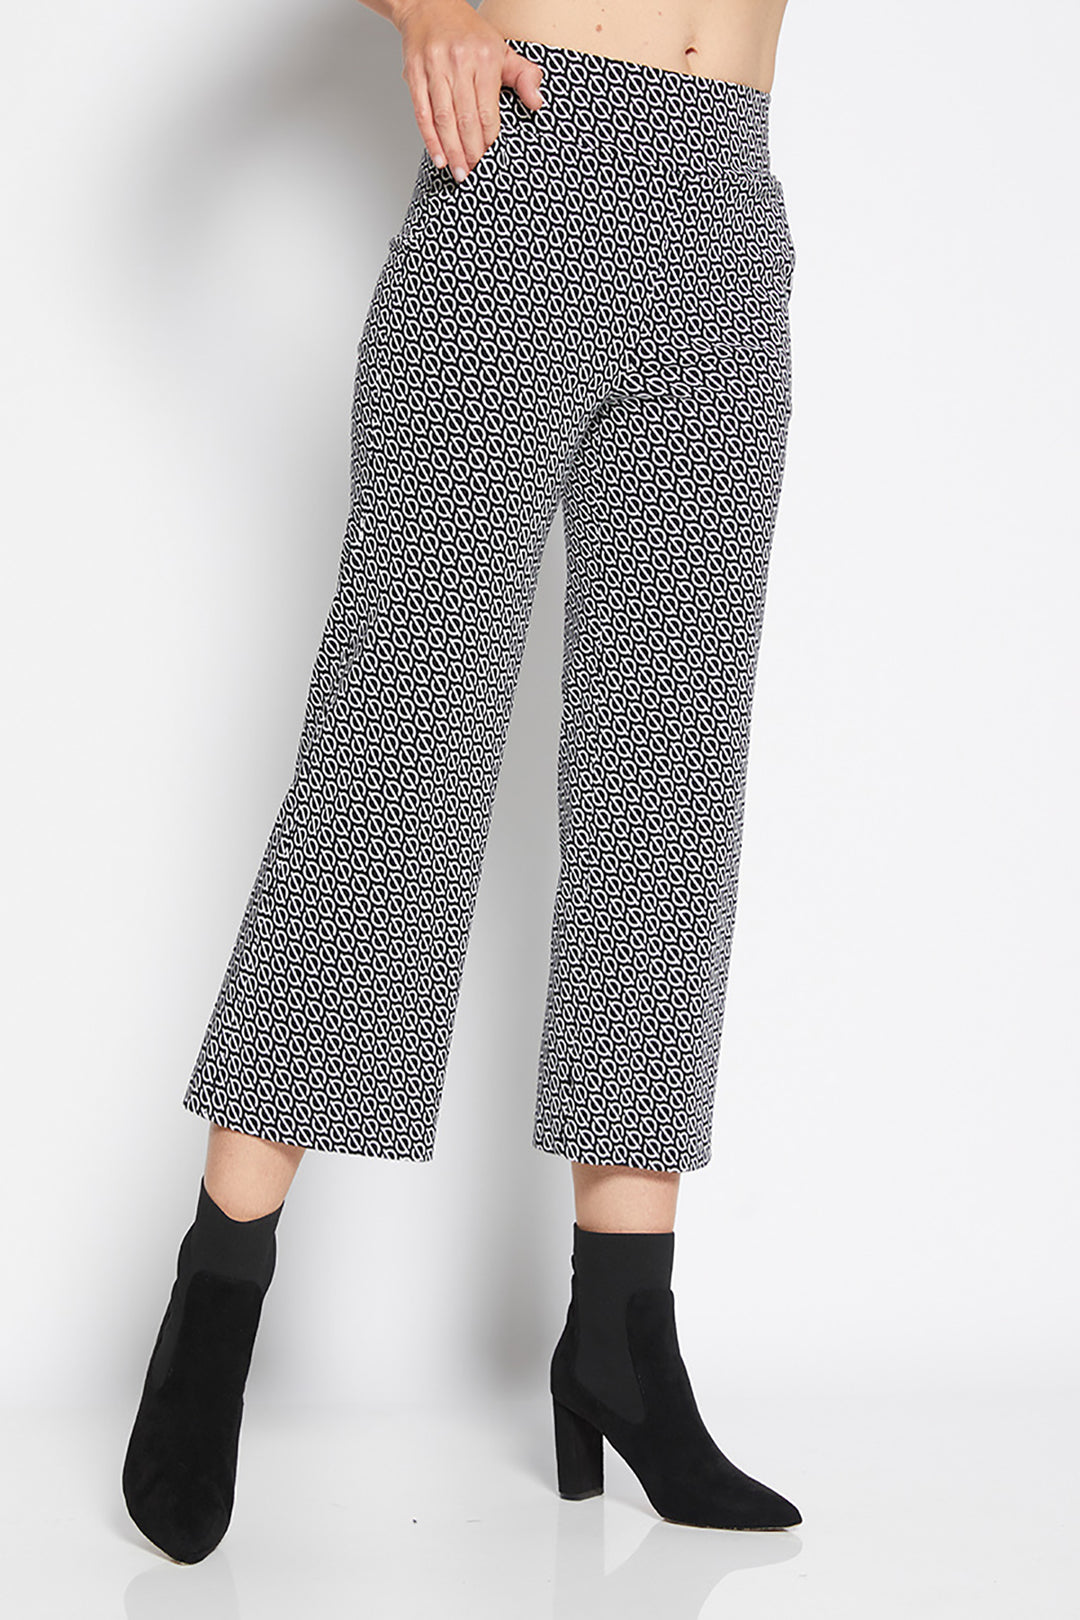 ticket culotte pant by philosophy Australia close up